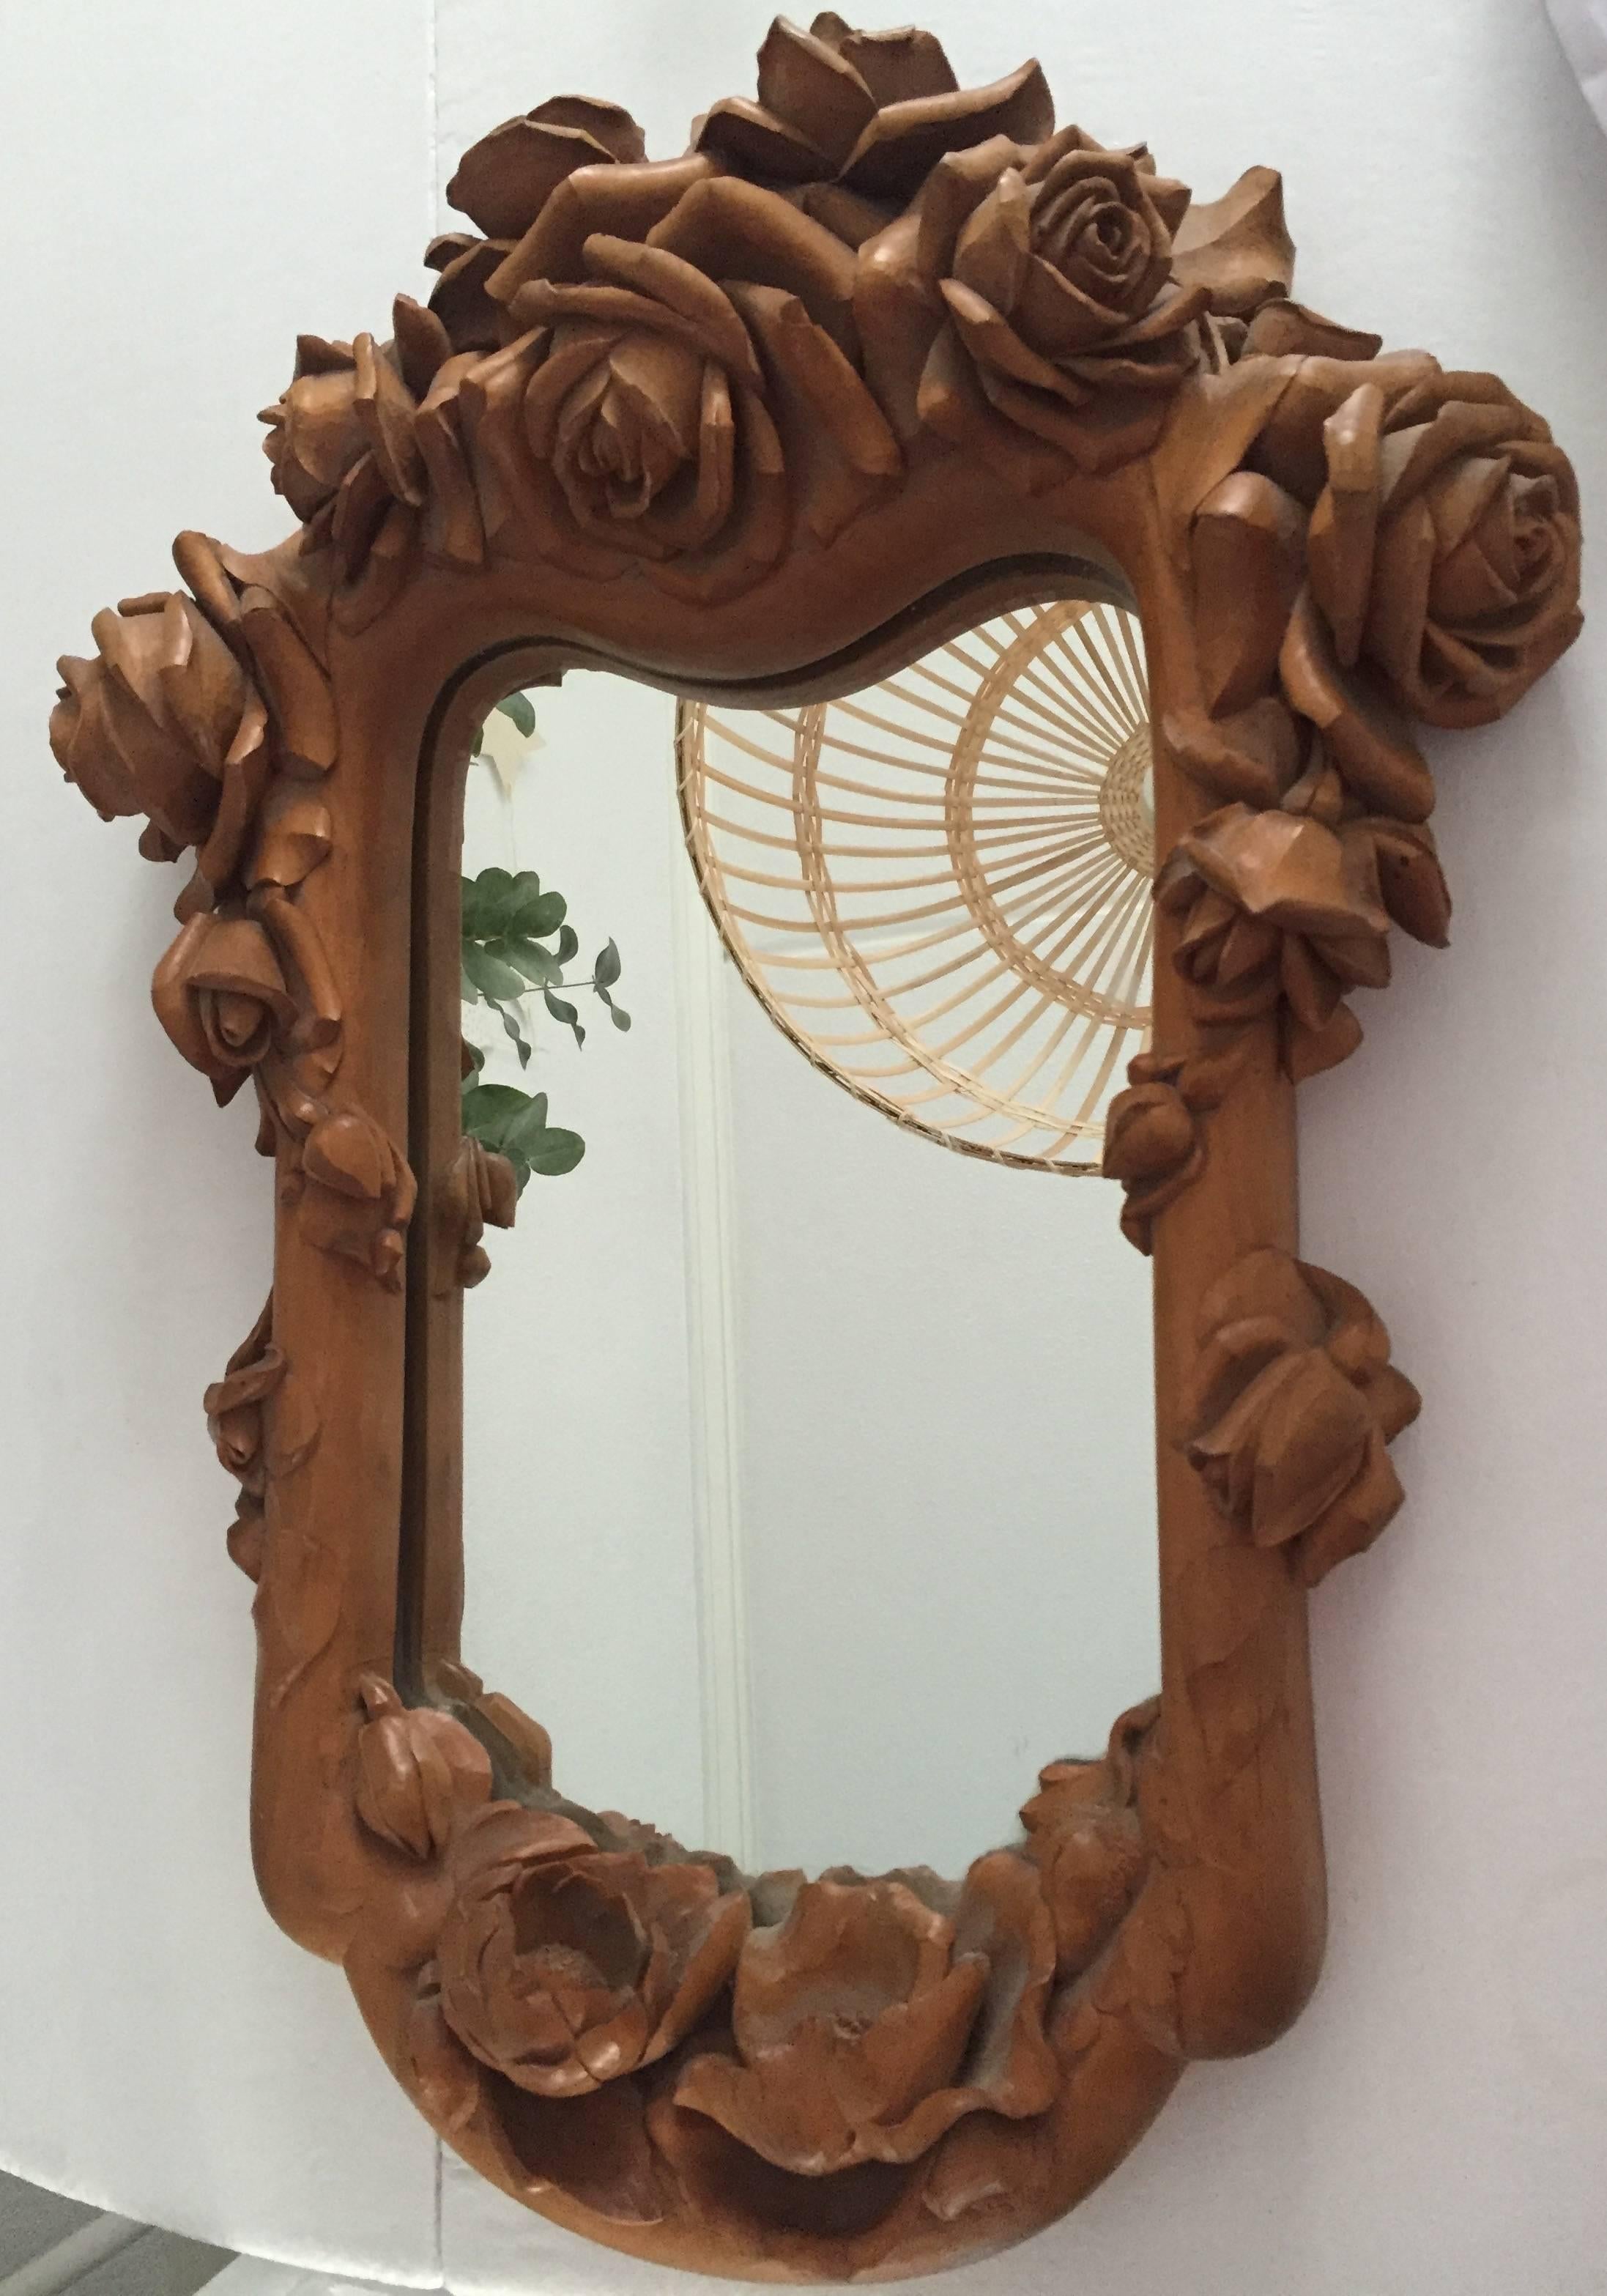 Top quality artistic and decorative mirror.

This magnificent wall mirror is carved out of one piece of wood. The abundance of blooming rozes is a joy to watch and the artist proudly (and rightly so) signed this work of art Jef. Deconinck, 1966. We